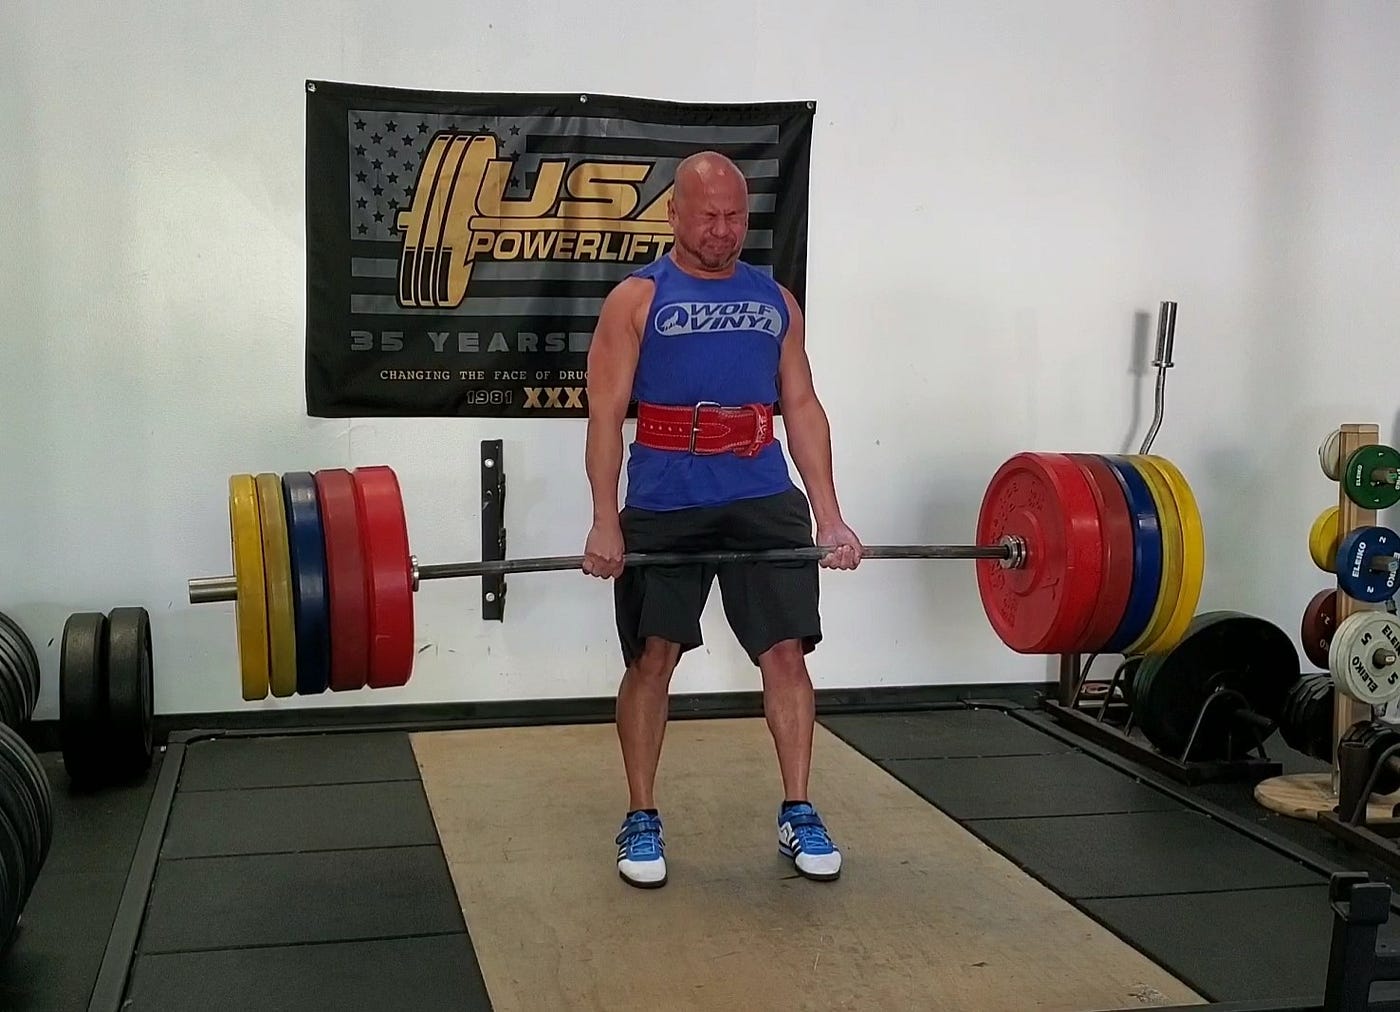 Is Dead-lifting 400 pounds at 1 rep better than 350 pounds at 2